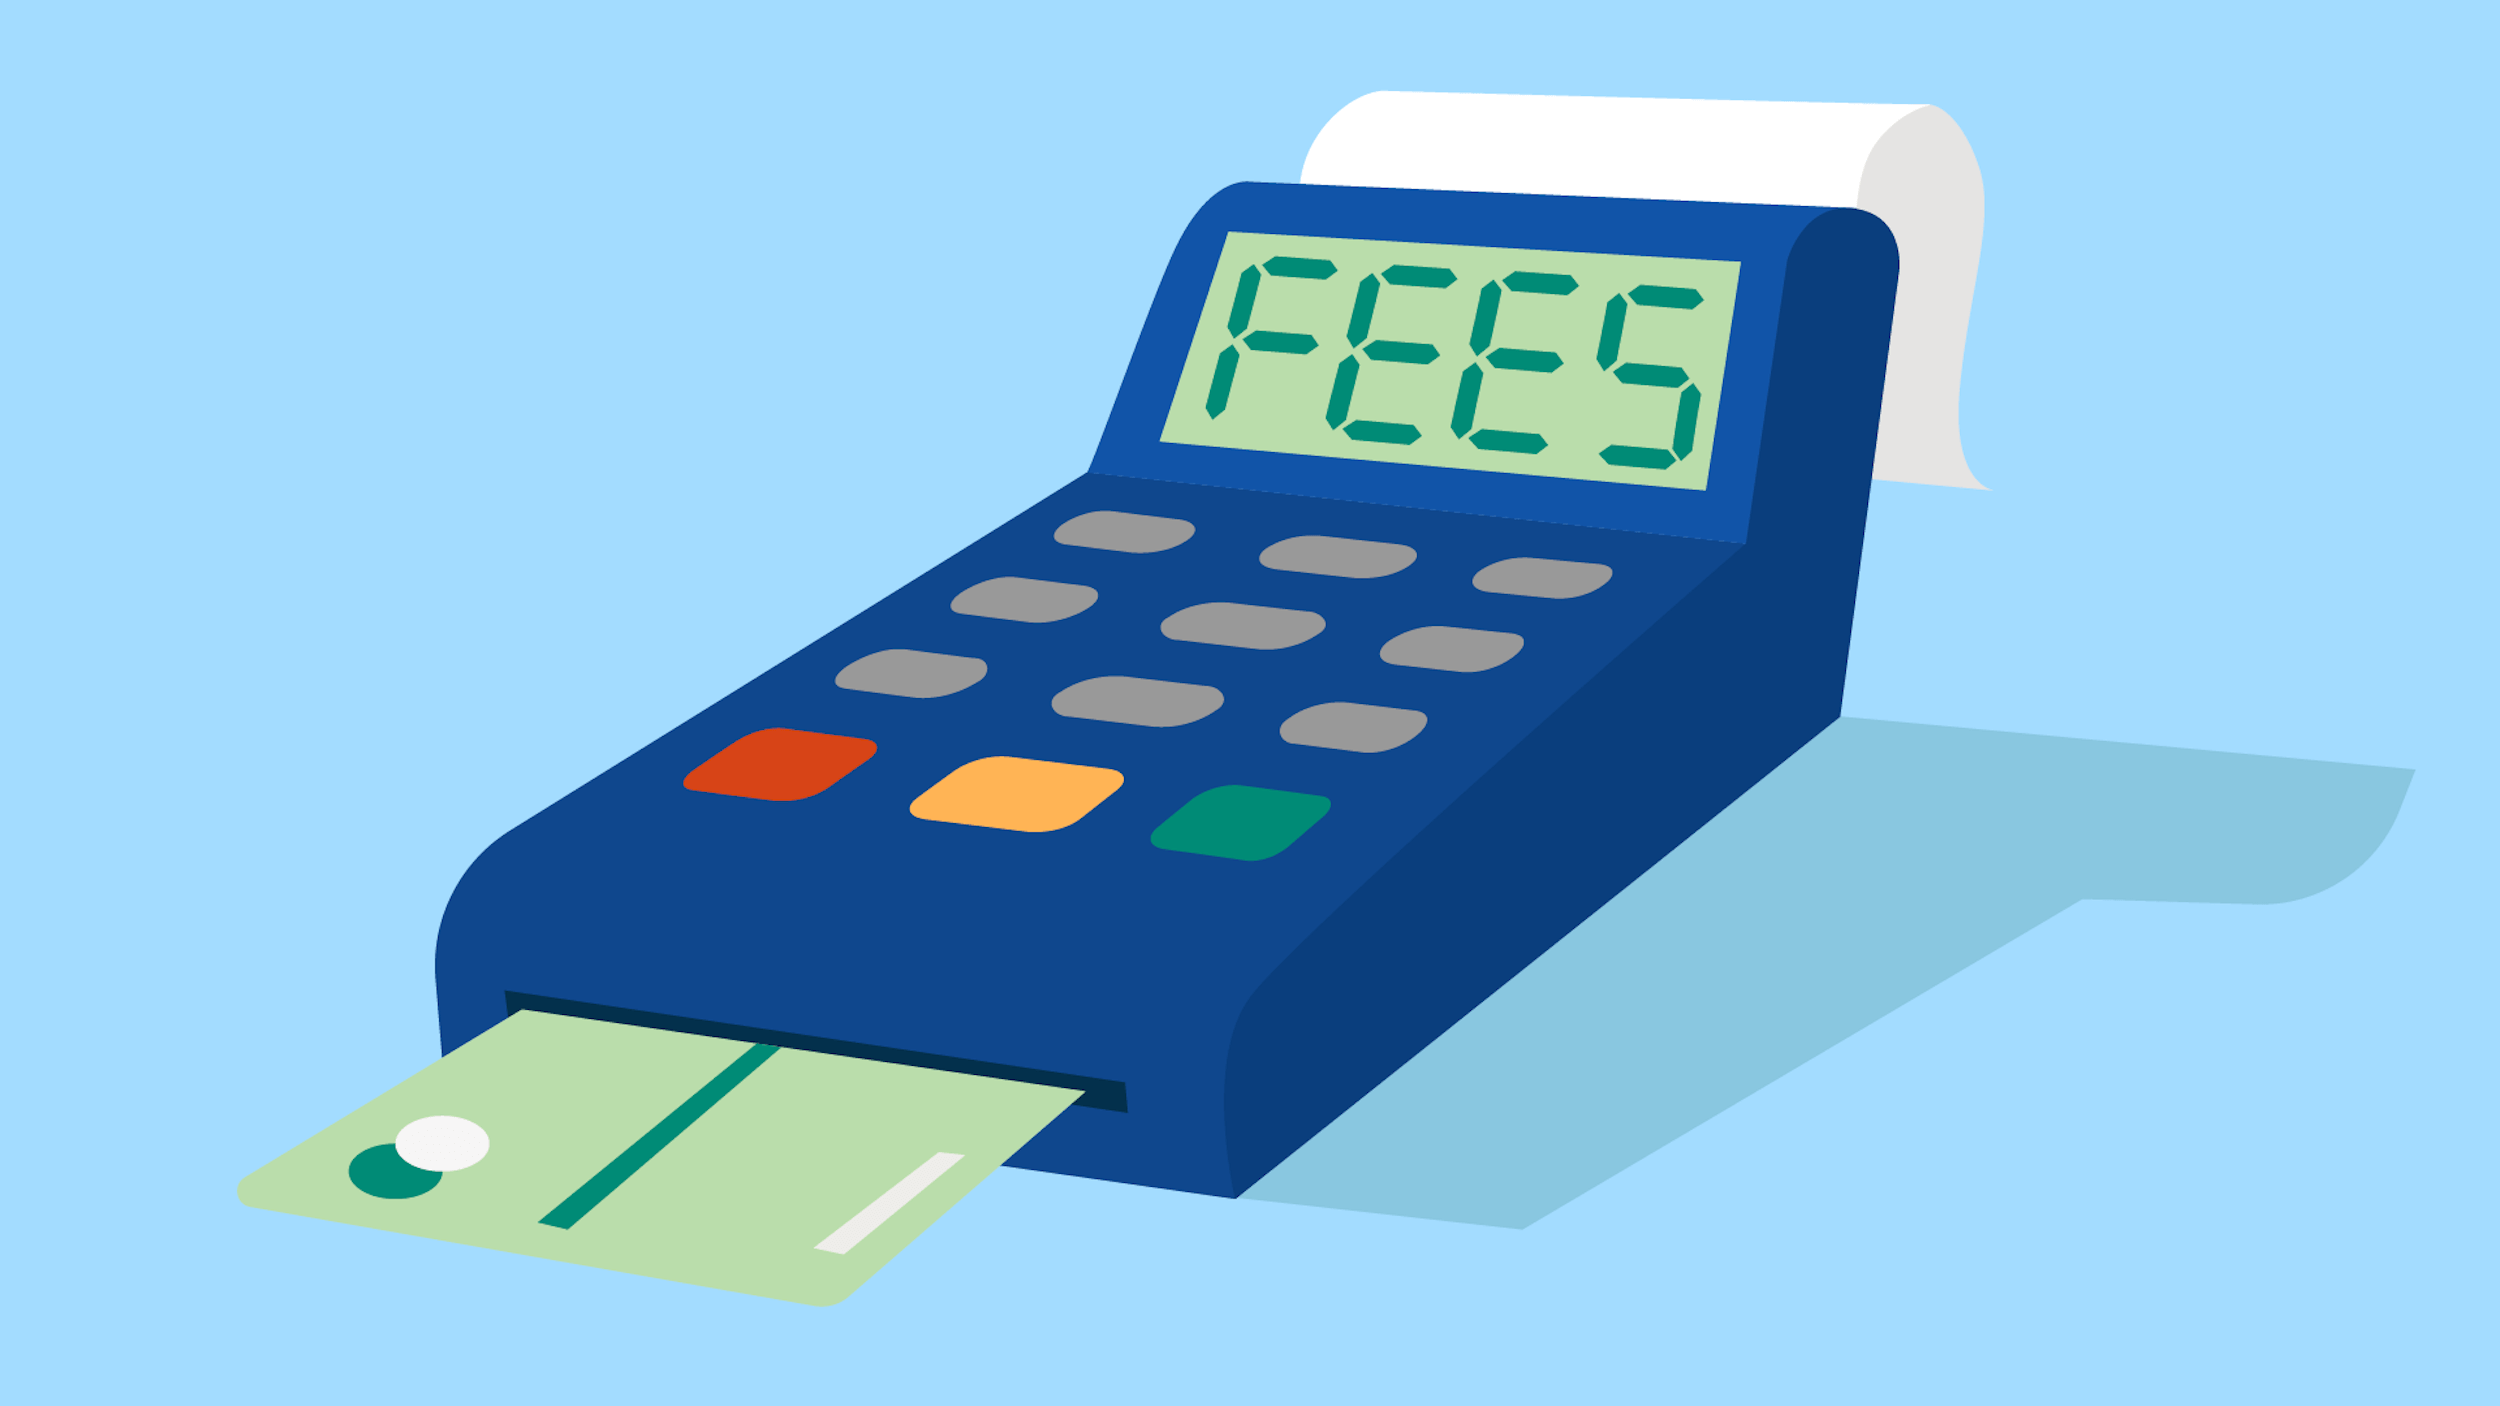 Fees for Credit Card Processing: A Guide